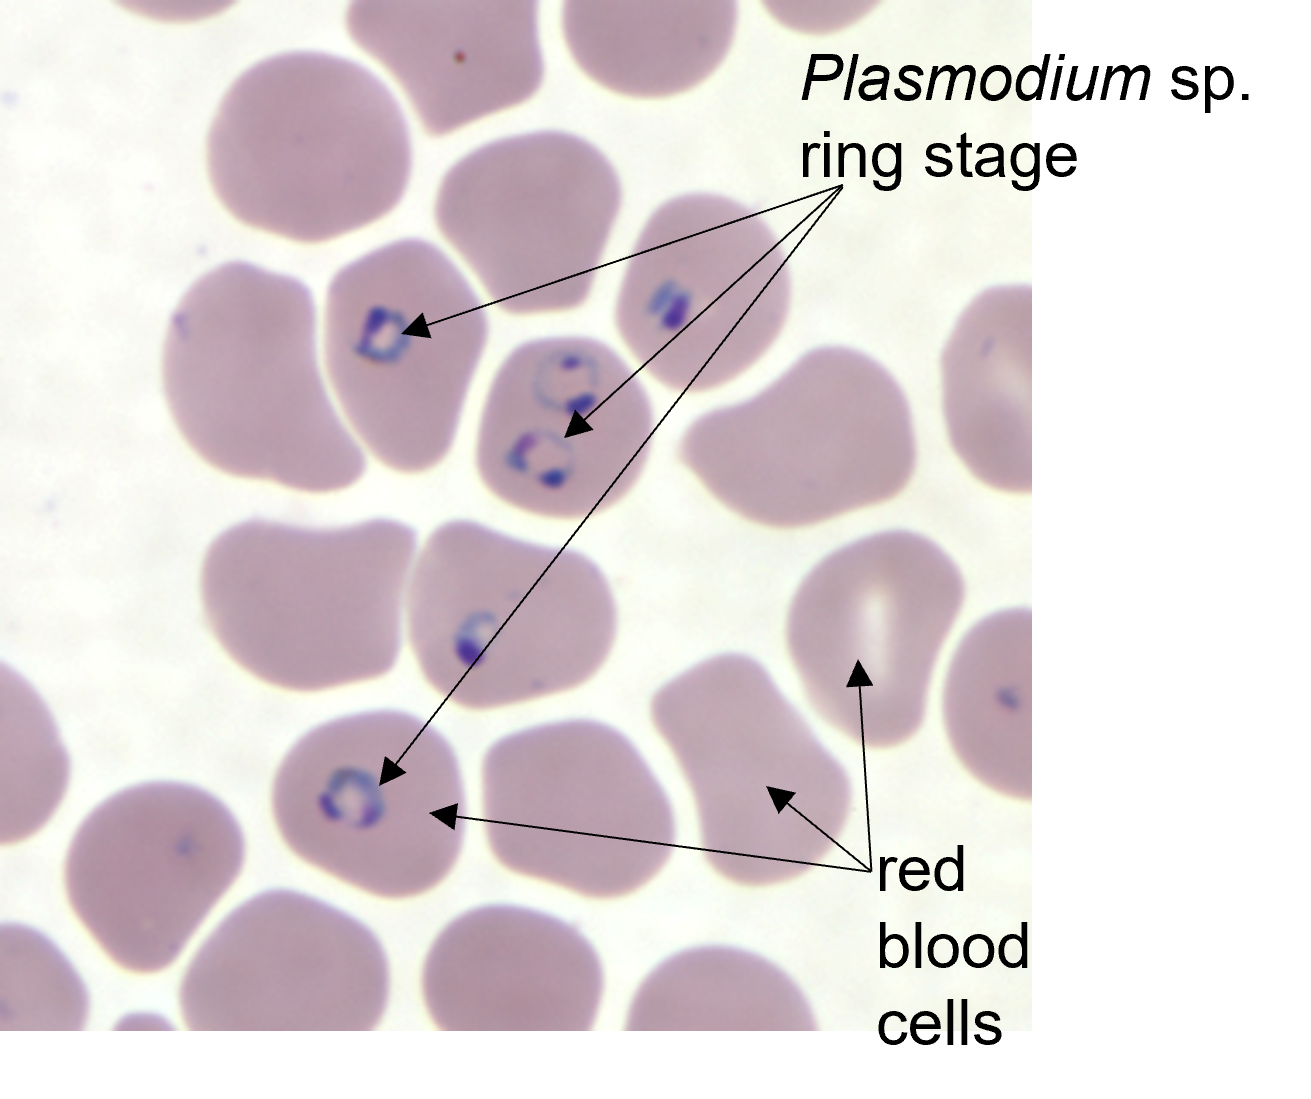 Plasmodium vivax ring stages, blood smear - Medical and Science Media